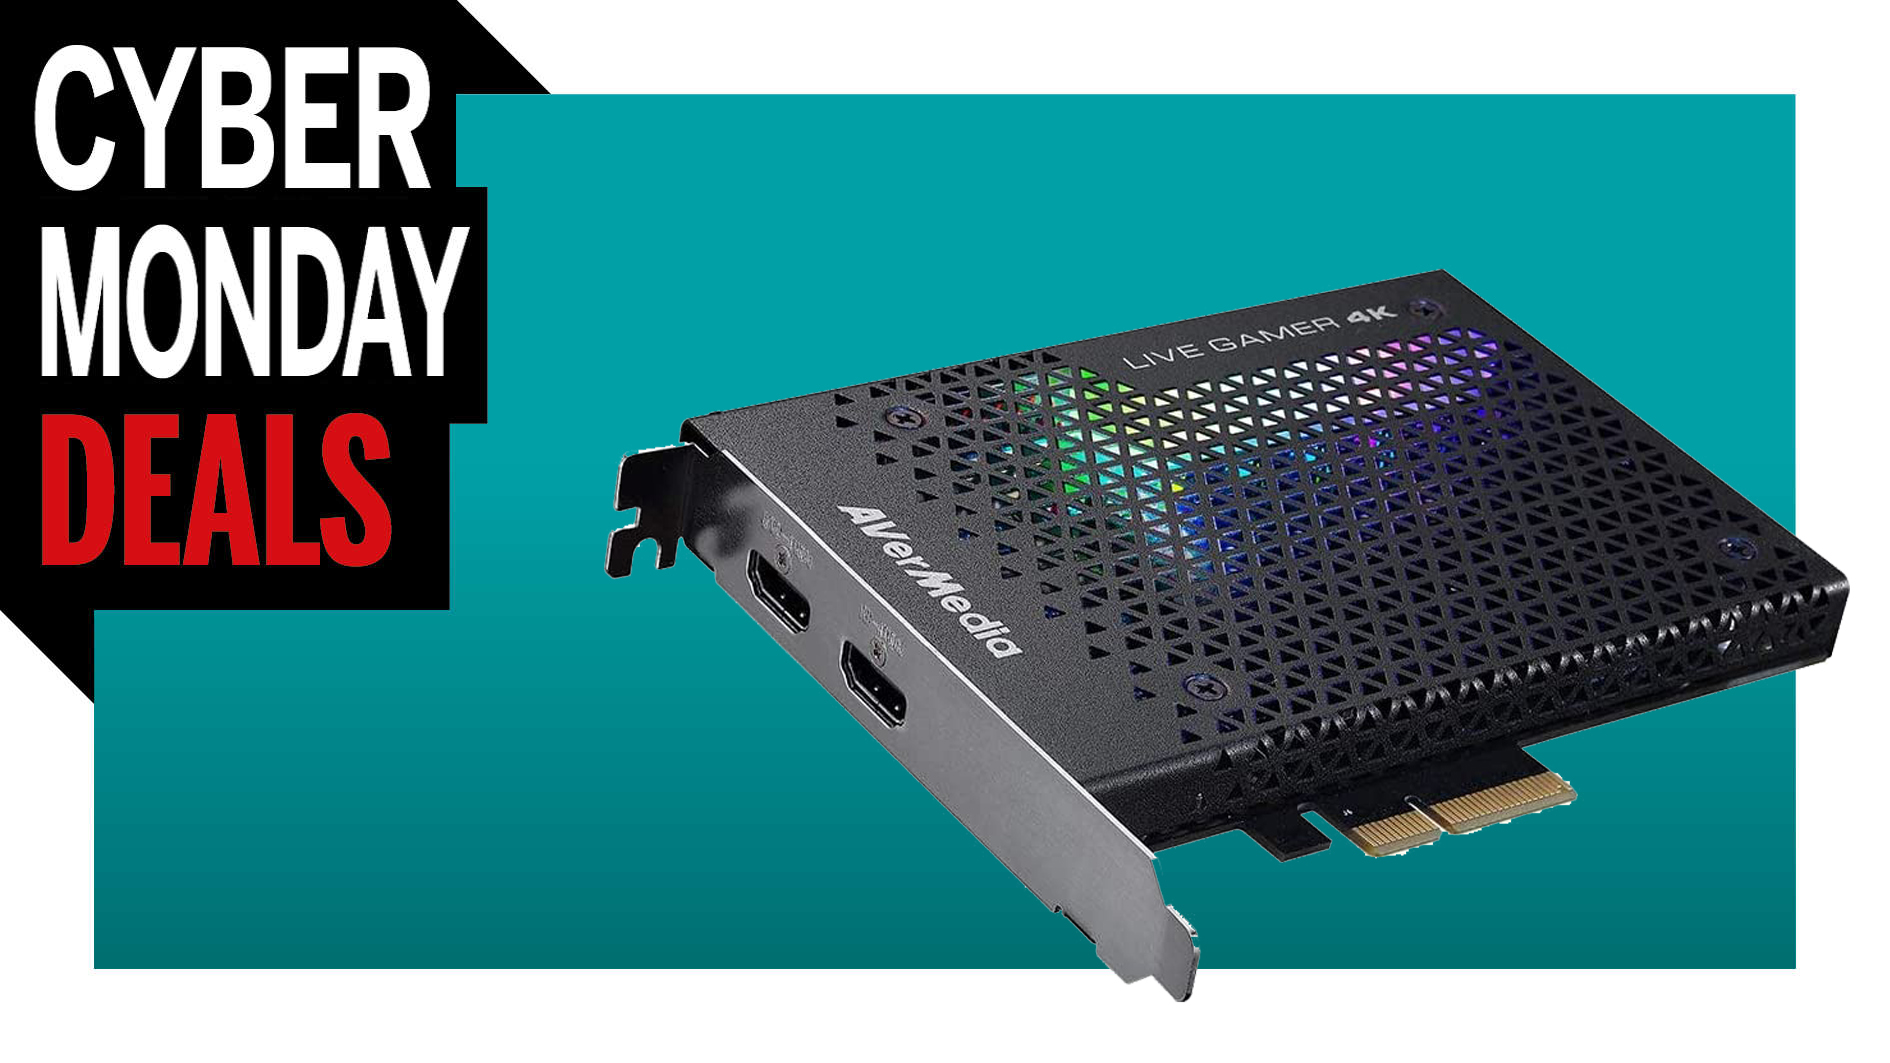  AVerMedia's 4K capture card is available at its lowest price yet for Cyber Monday 